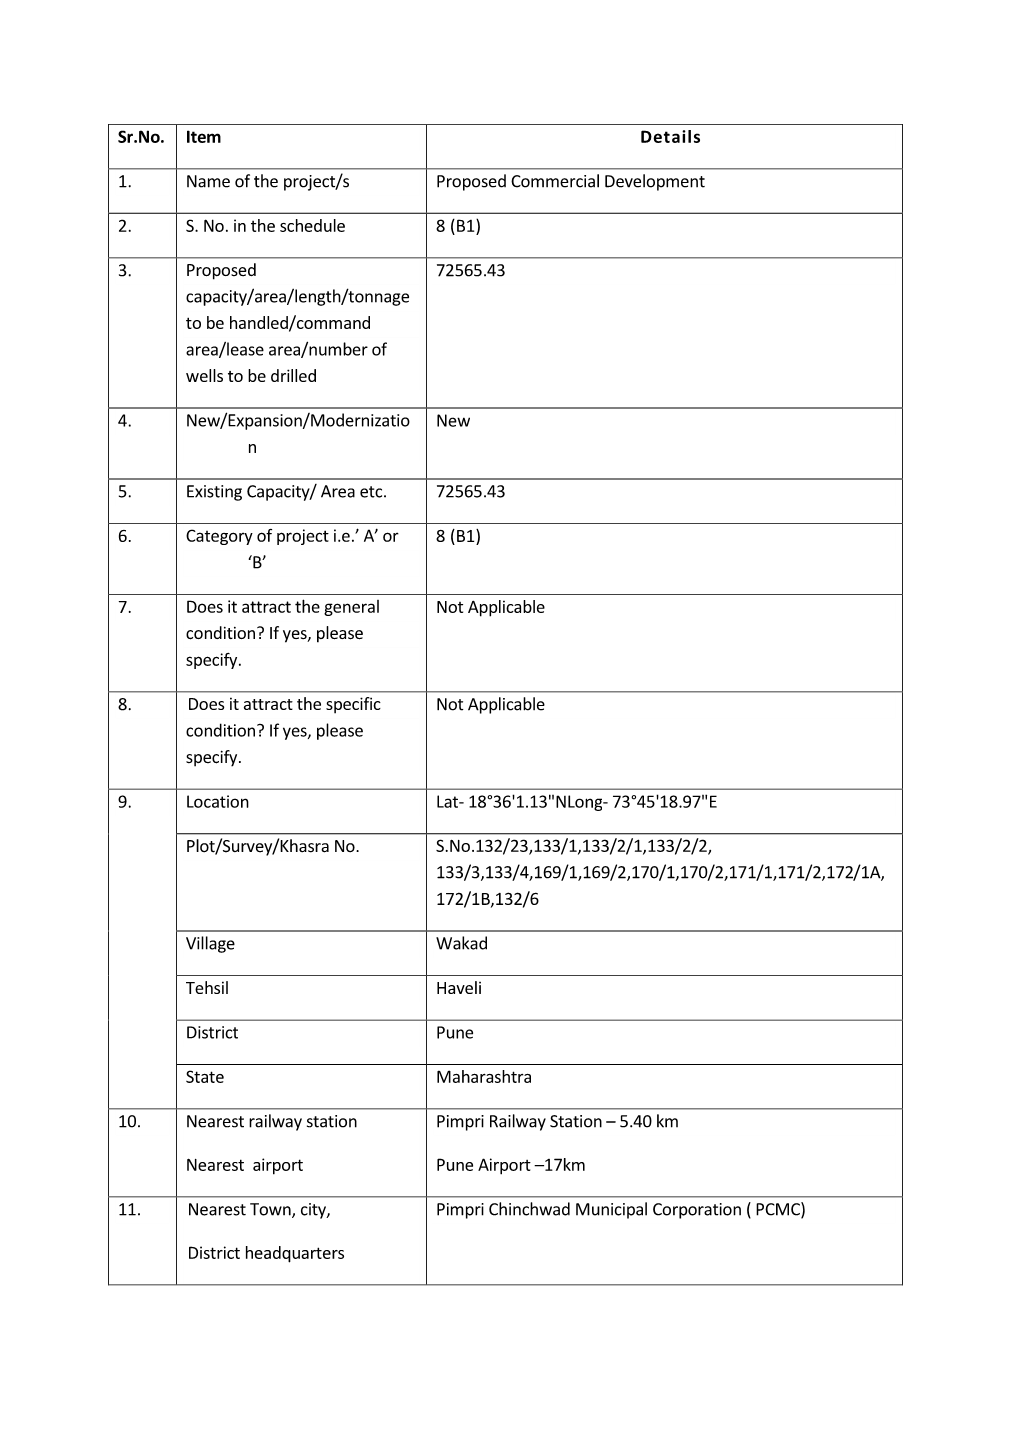 Sr.No. Item Details 1. Name of the Project/S Proposed Commercial